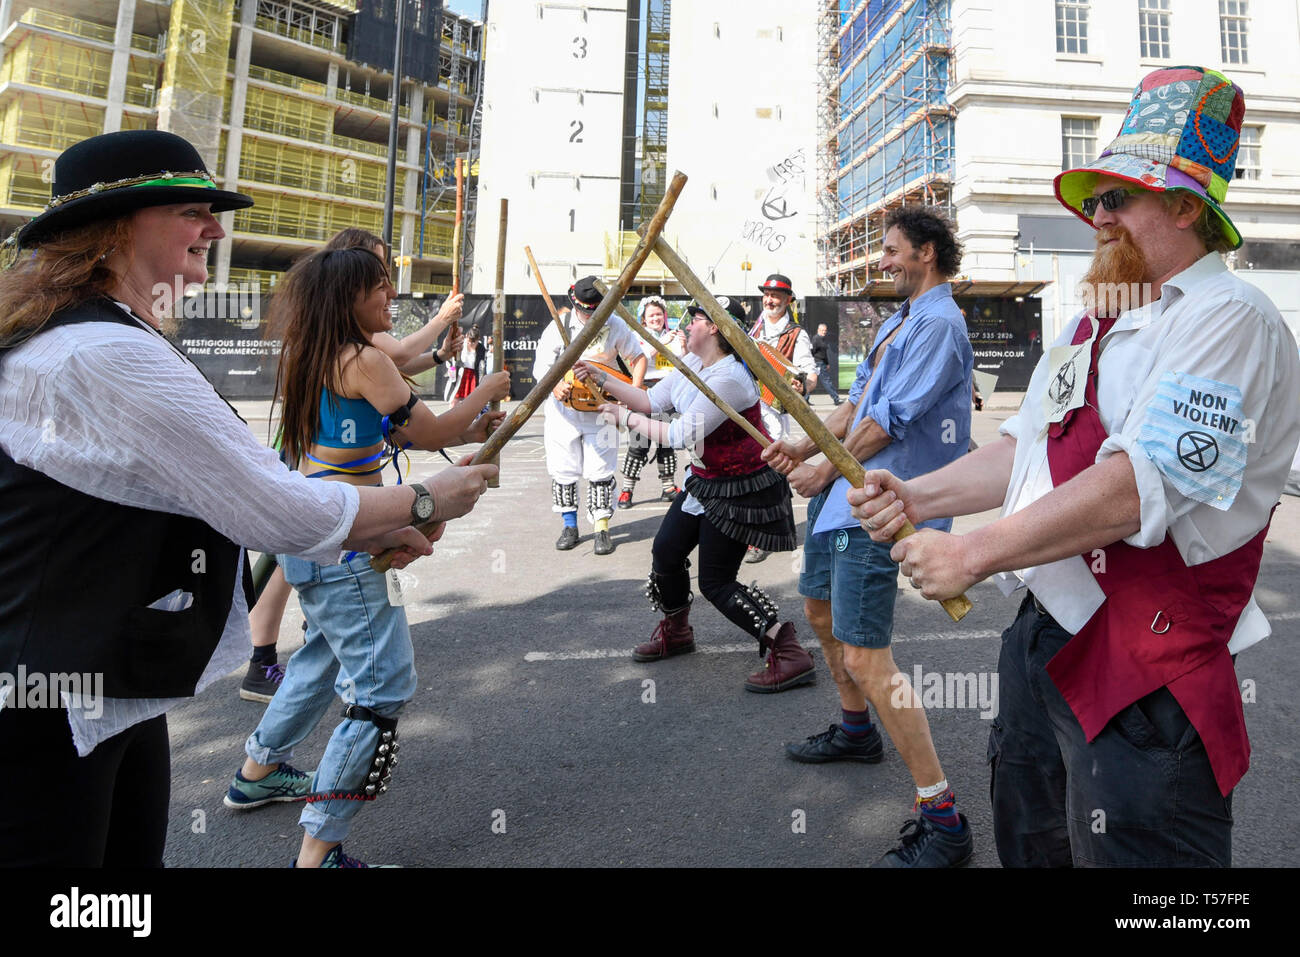 London, UK.  22 April 2019.  Morris dancing activists at Marble Arch during 'London: International Rebellion', on day eight of a protest organised by Extinction Rebellion.  Protesters are demanding that governments take action against climate change.  After police issued section 14 orders at the other protest sites of Oxford Circus, Waterloo Bridge and Parliament Square resulting in over 900 arrests, protesters have convened at the designated site of Marble Arch so that the protest can continue into its second week.  Credit: Stephen Chung / Alamy Live News Stock Photo